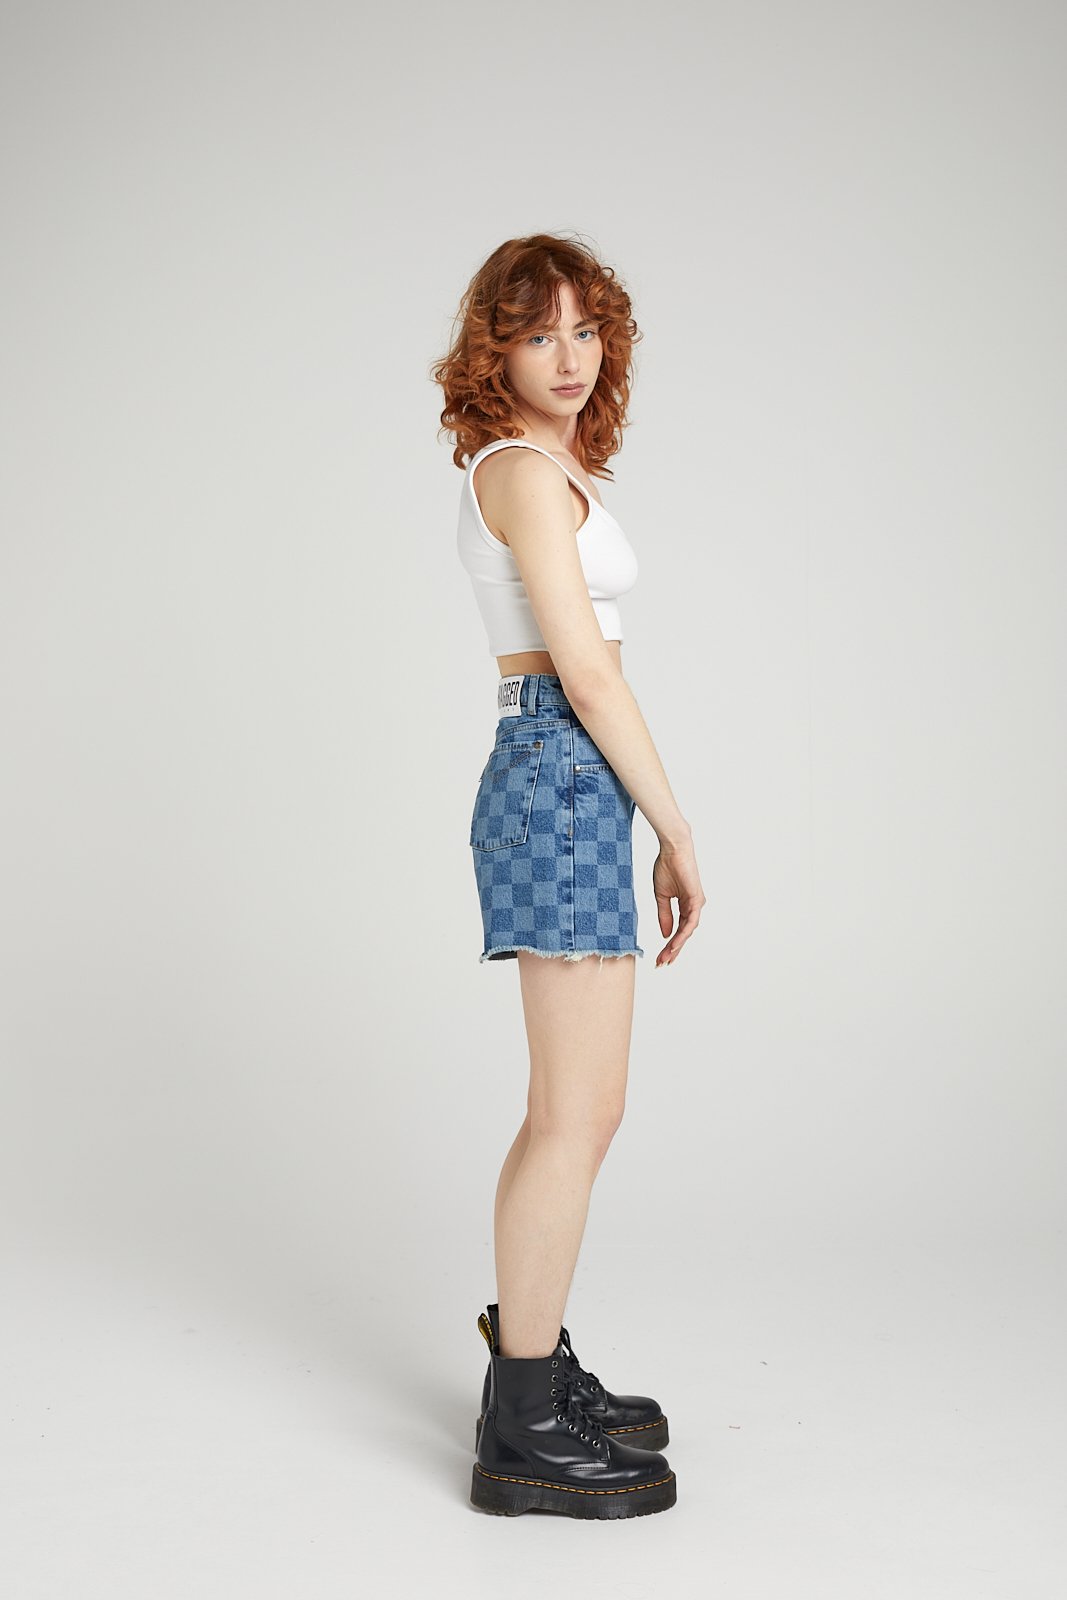 RAVE DENIM SHORTS - JEANIOUS BLUE - EXCLUSIVE Denim from THE RAGGED PRIEST - Just €48.95! SHOP NOW AT IAMINHATELOVE BOTH IN STORE FOR CYPRUS AND ONLINE WORLDWIDE @ IAMINHATELOVE.COM